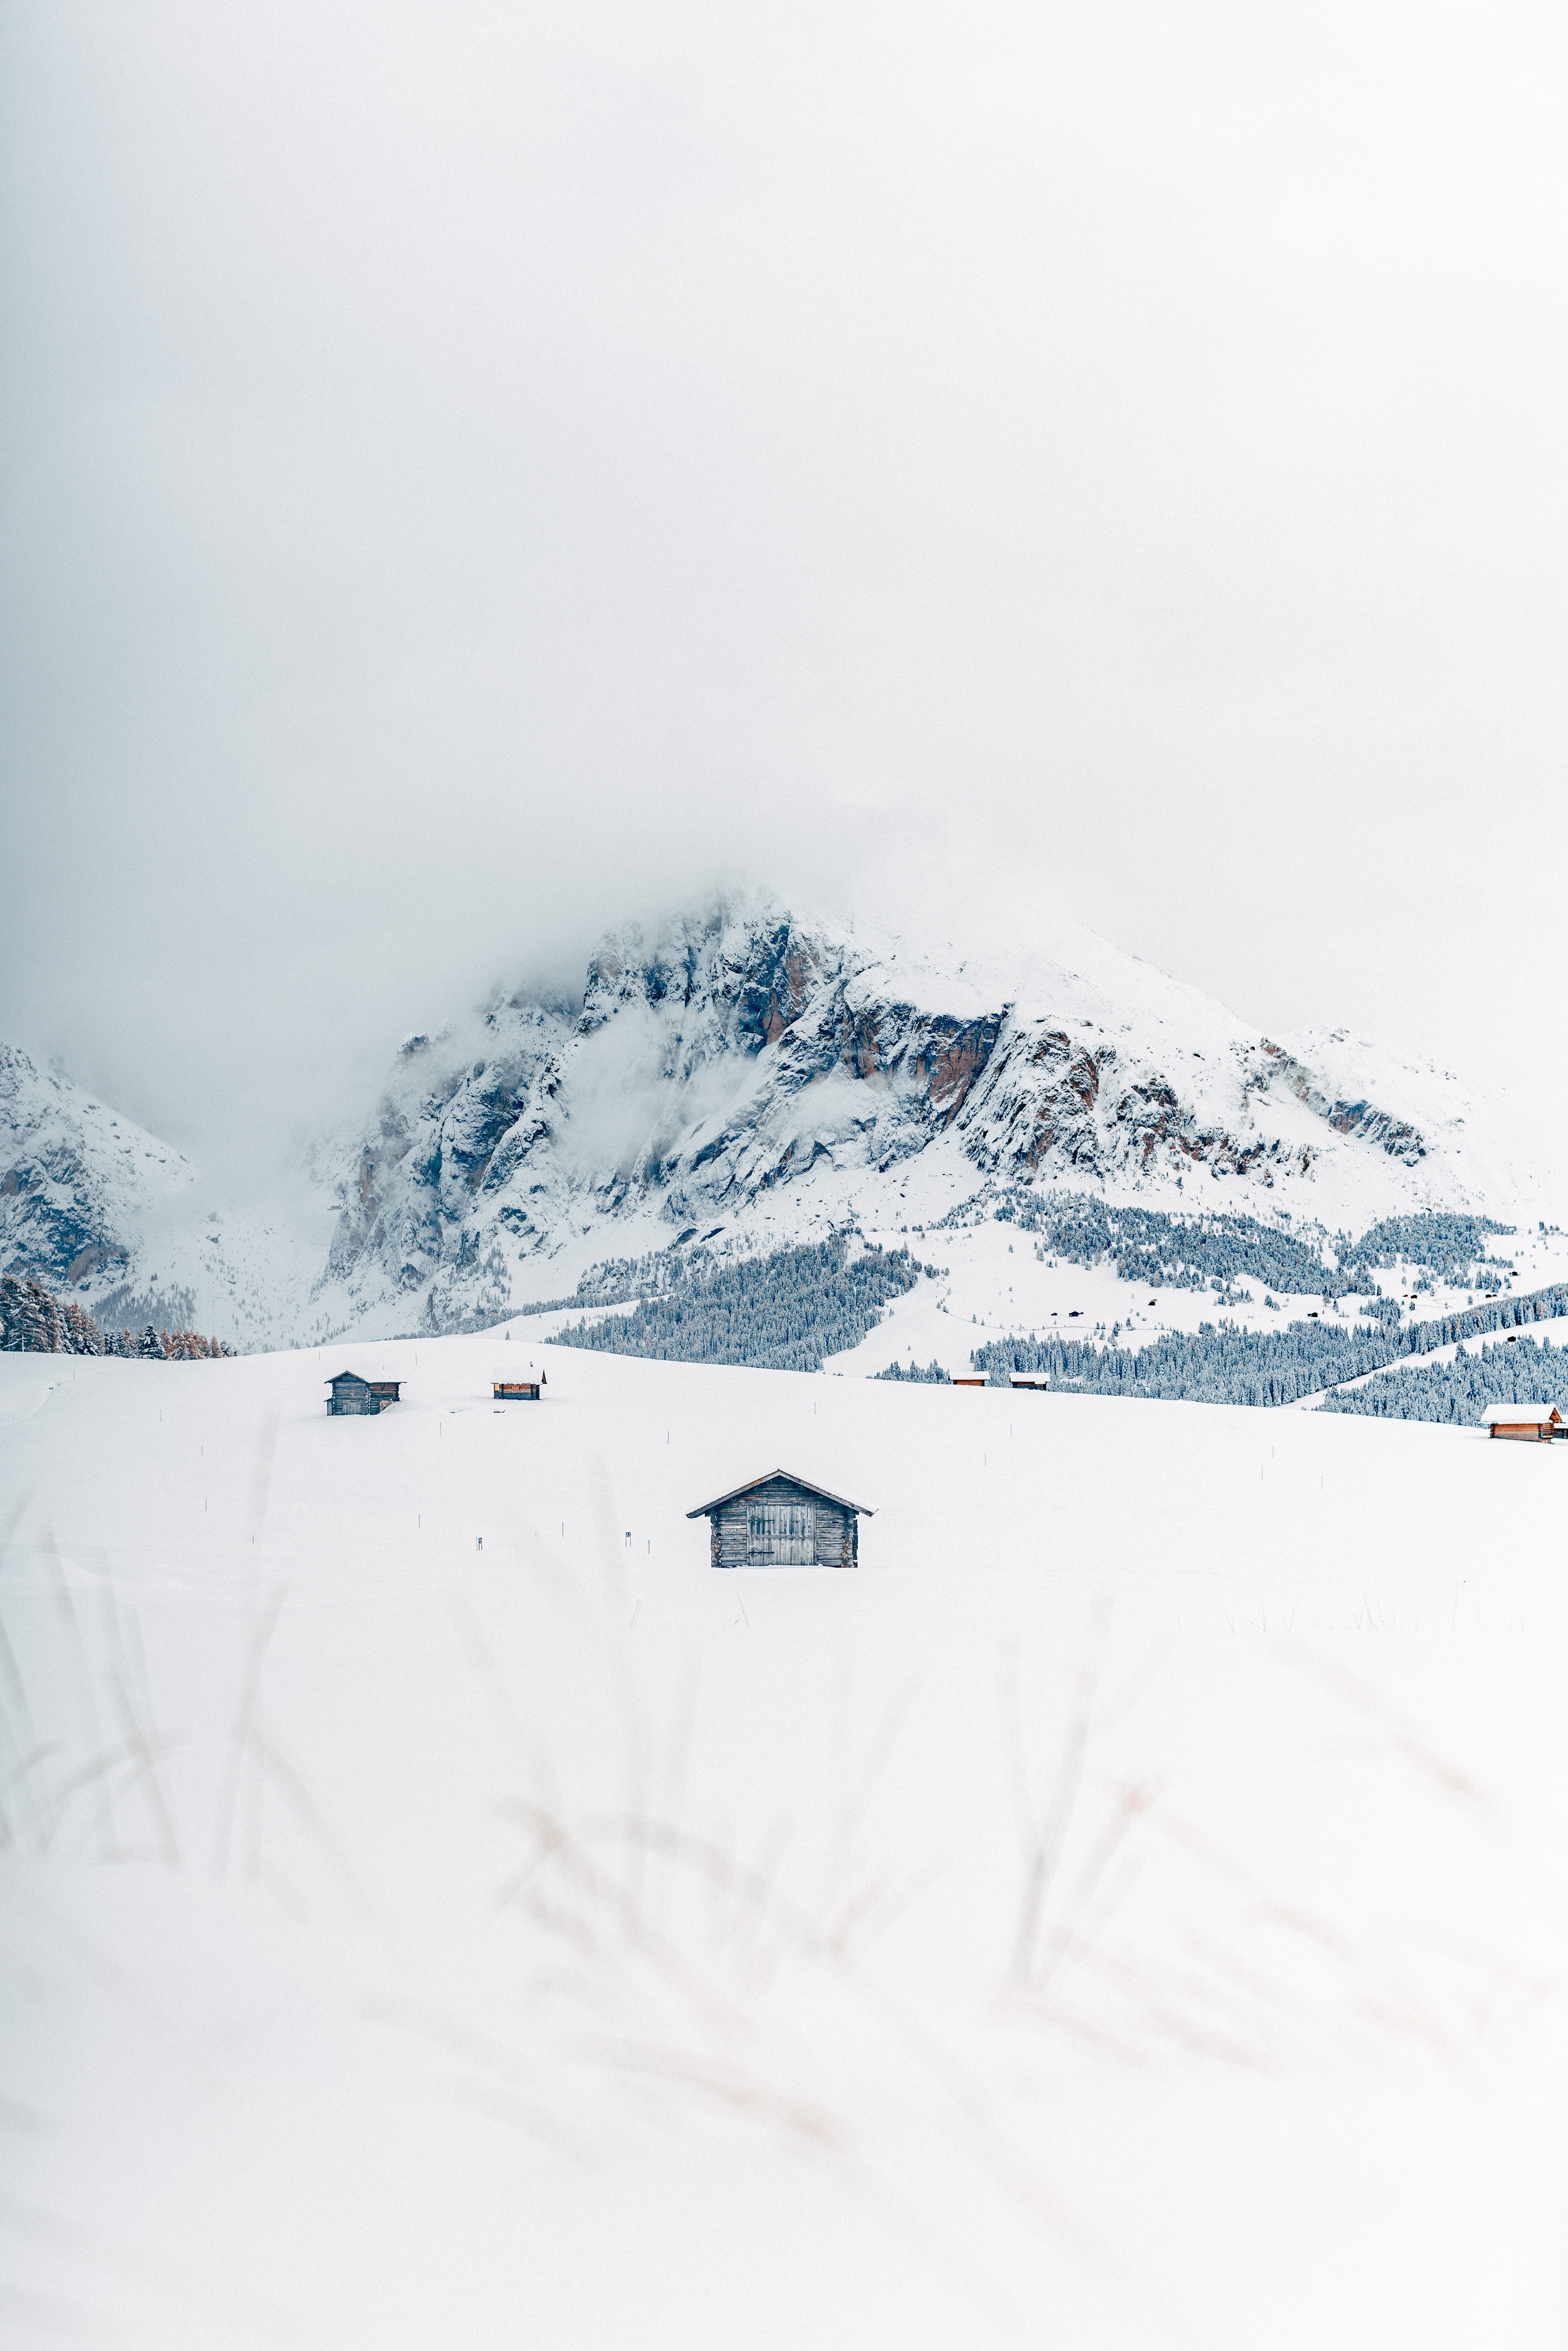 1920x1080 Background landscape, winter, nature, houses, mountains, snow, small houses